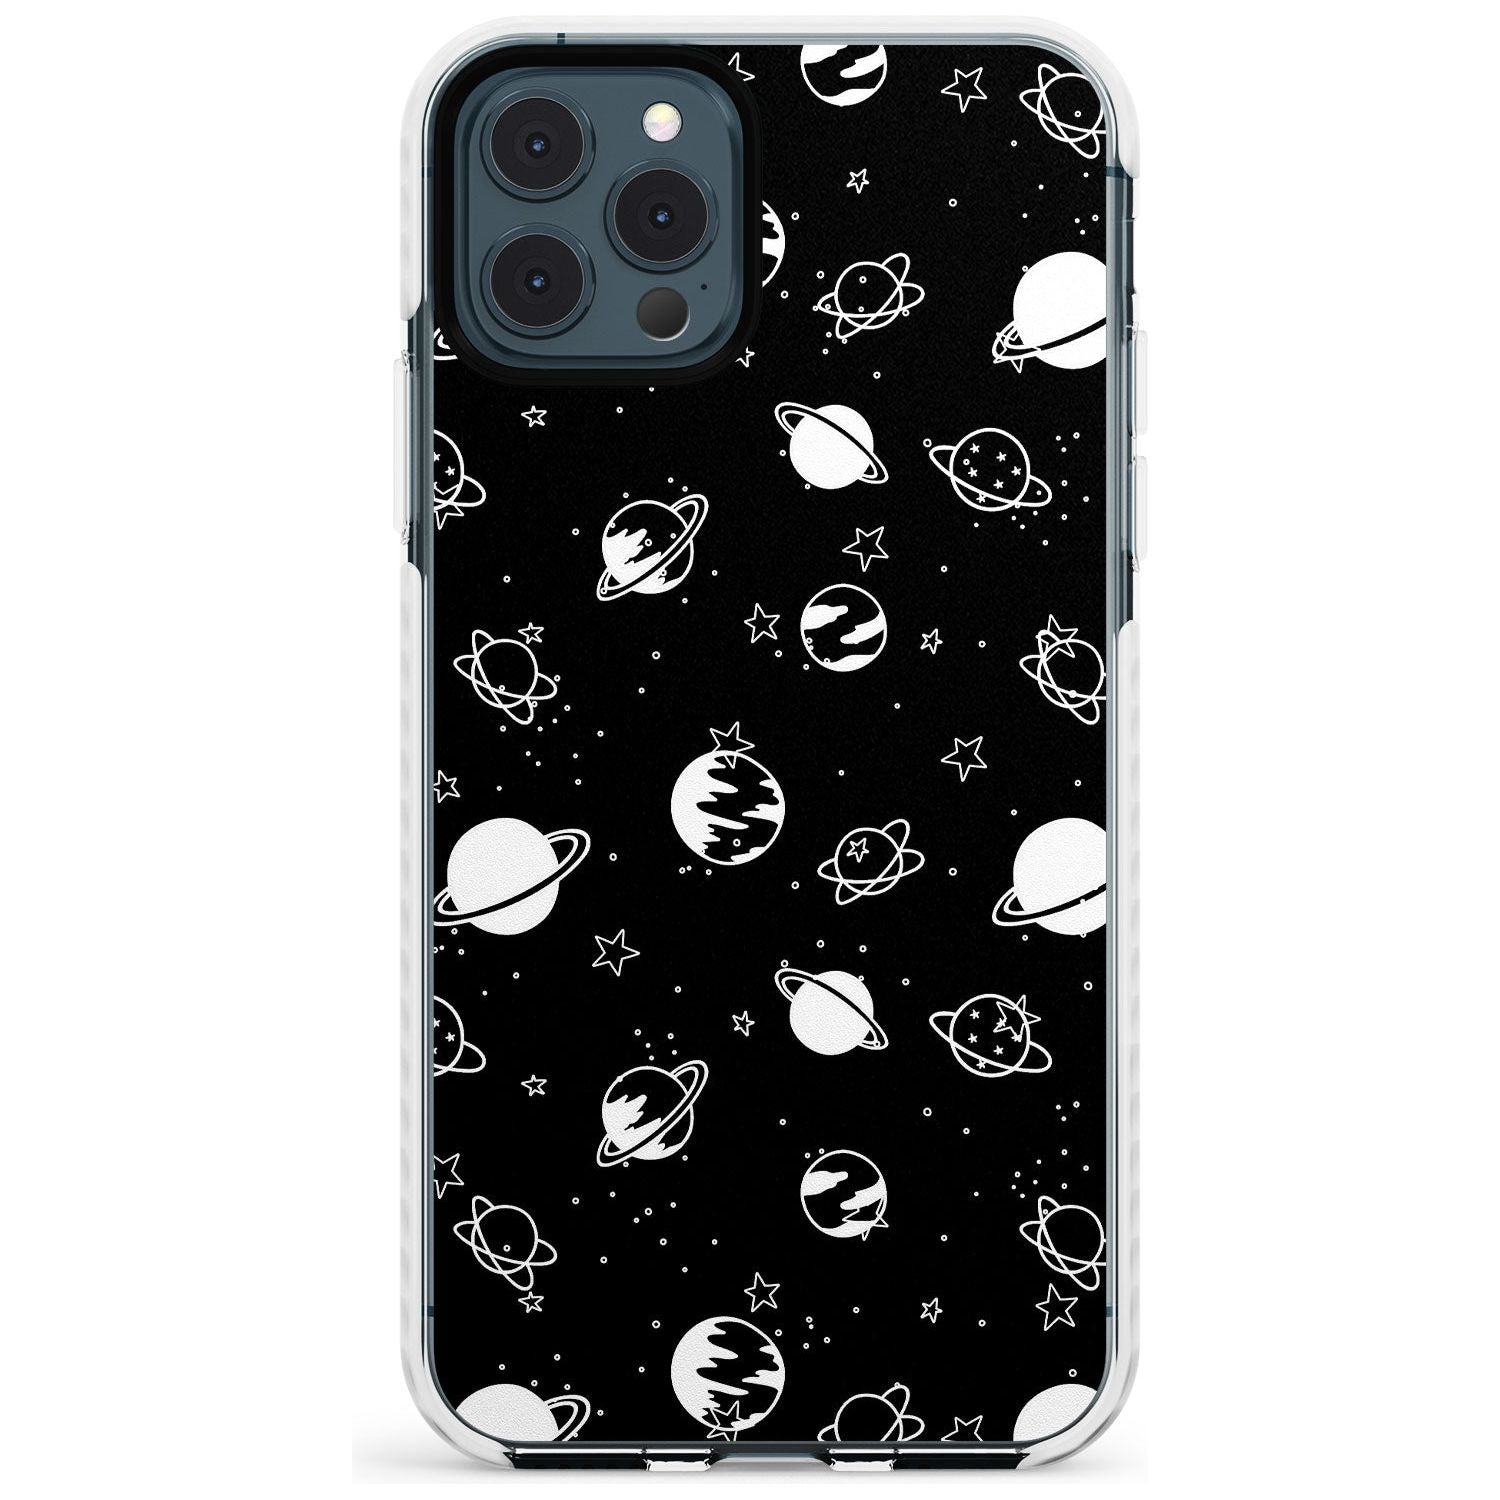 White Planets on Black Slim TPU Phone Case for iPhone 11 Pro Max